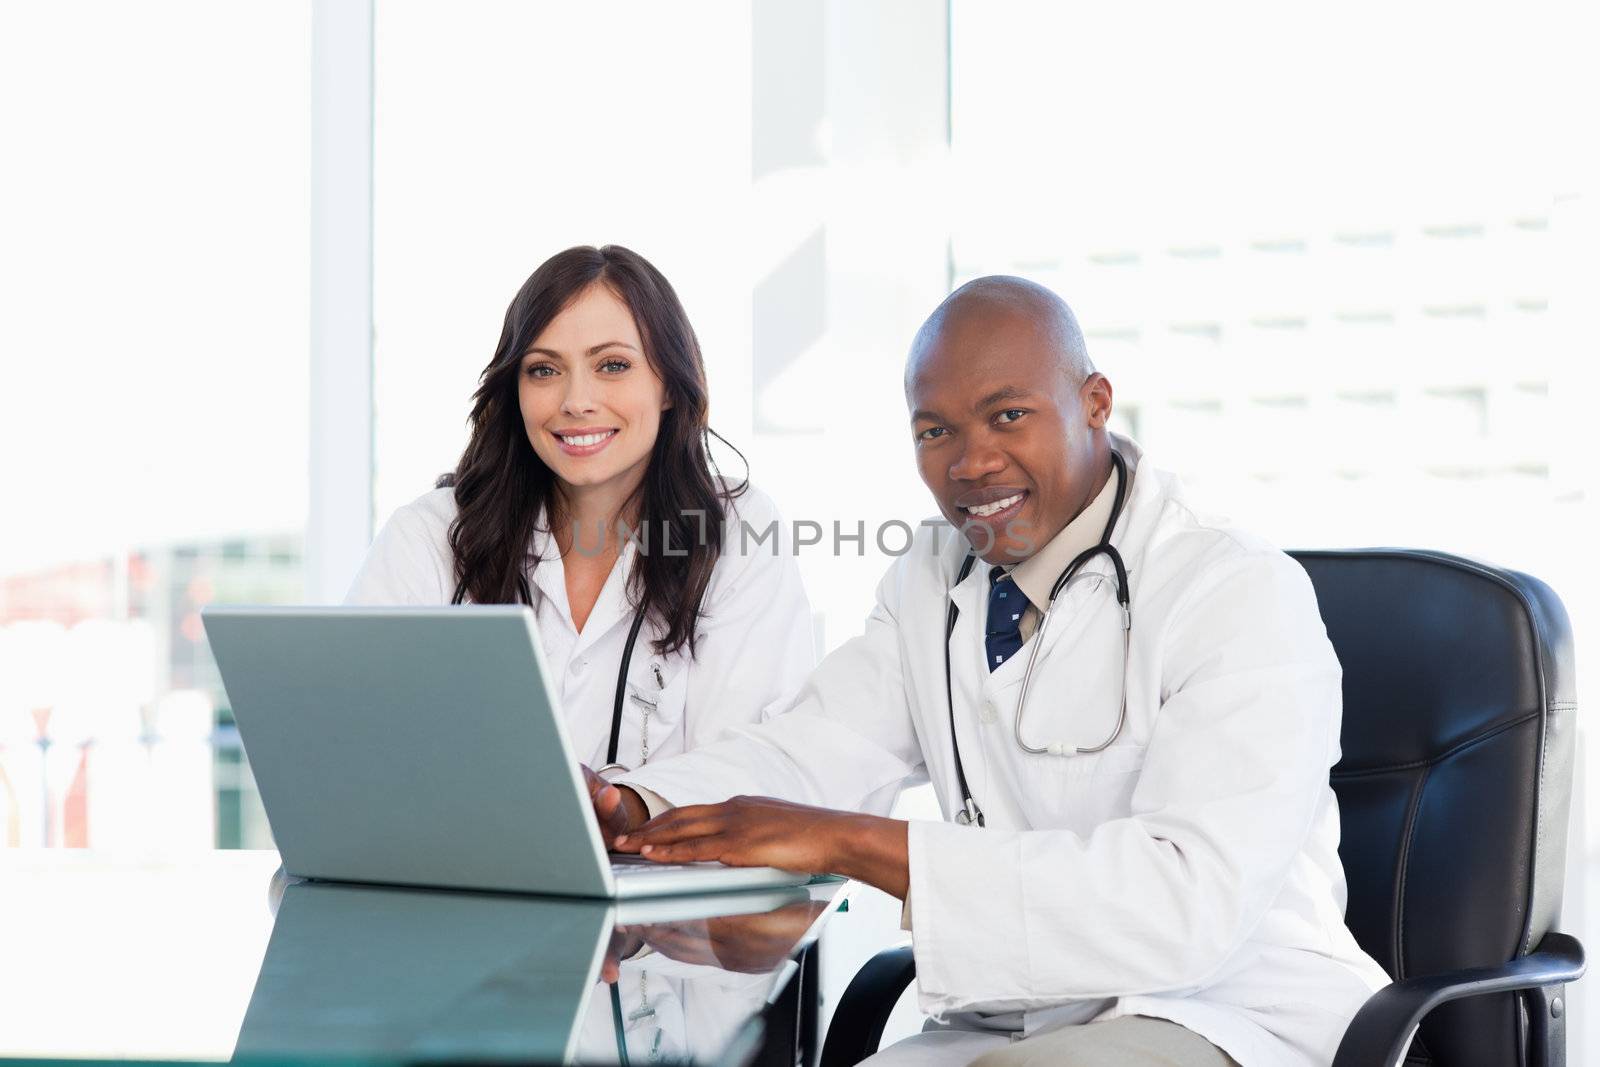 Smiling nurses seriously working while sitting at the desk in a bright room